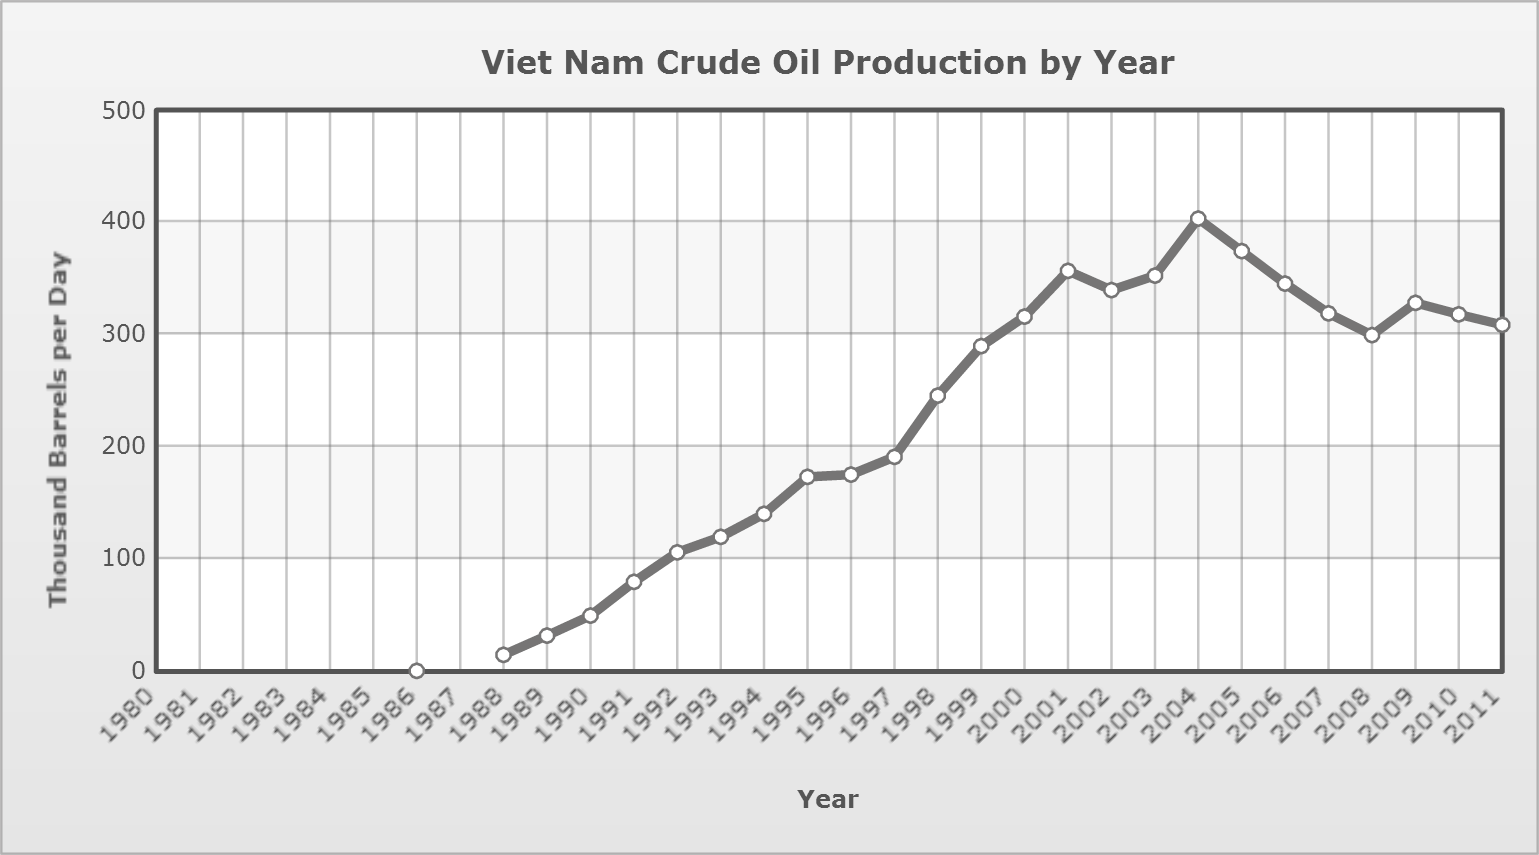 Vietnam’s annual crude oil production by year